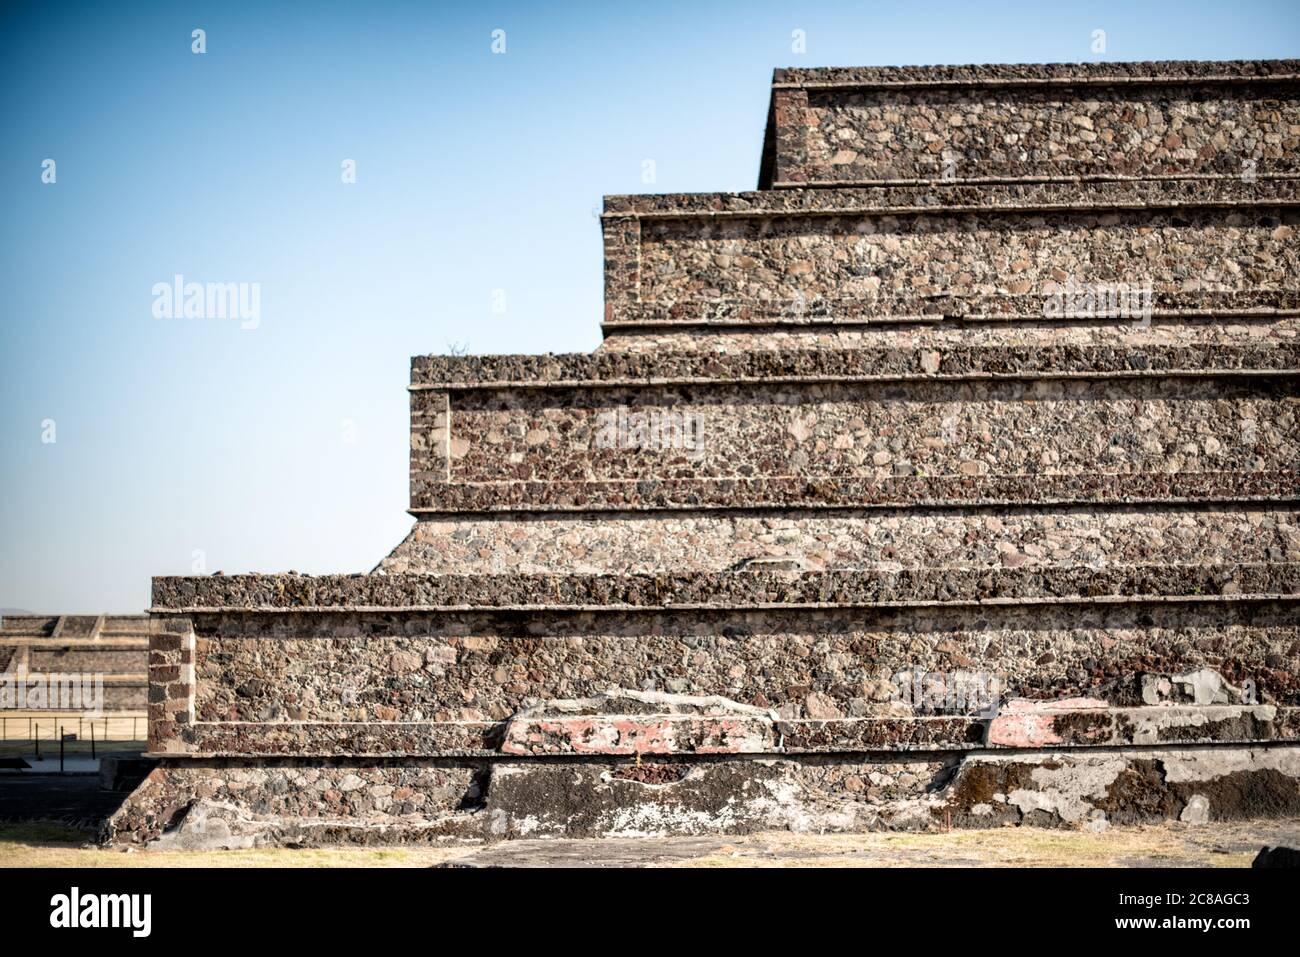 TEOTIHUACAN, Mexico - The Temple of the Feathered Serpent at Teotihuacan. Also known as the Temple of Quetzalcoatl. Teotihuacan is an ancient Mesoamer Stock Photo